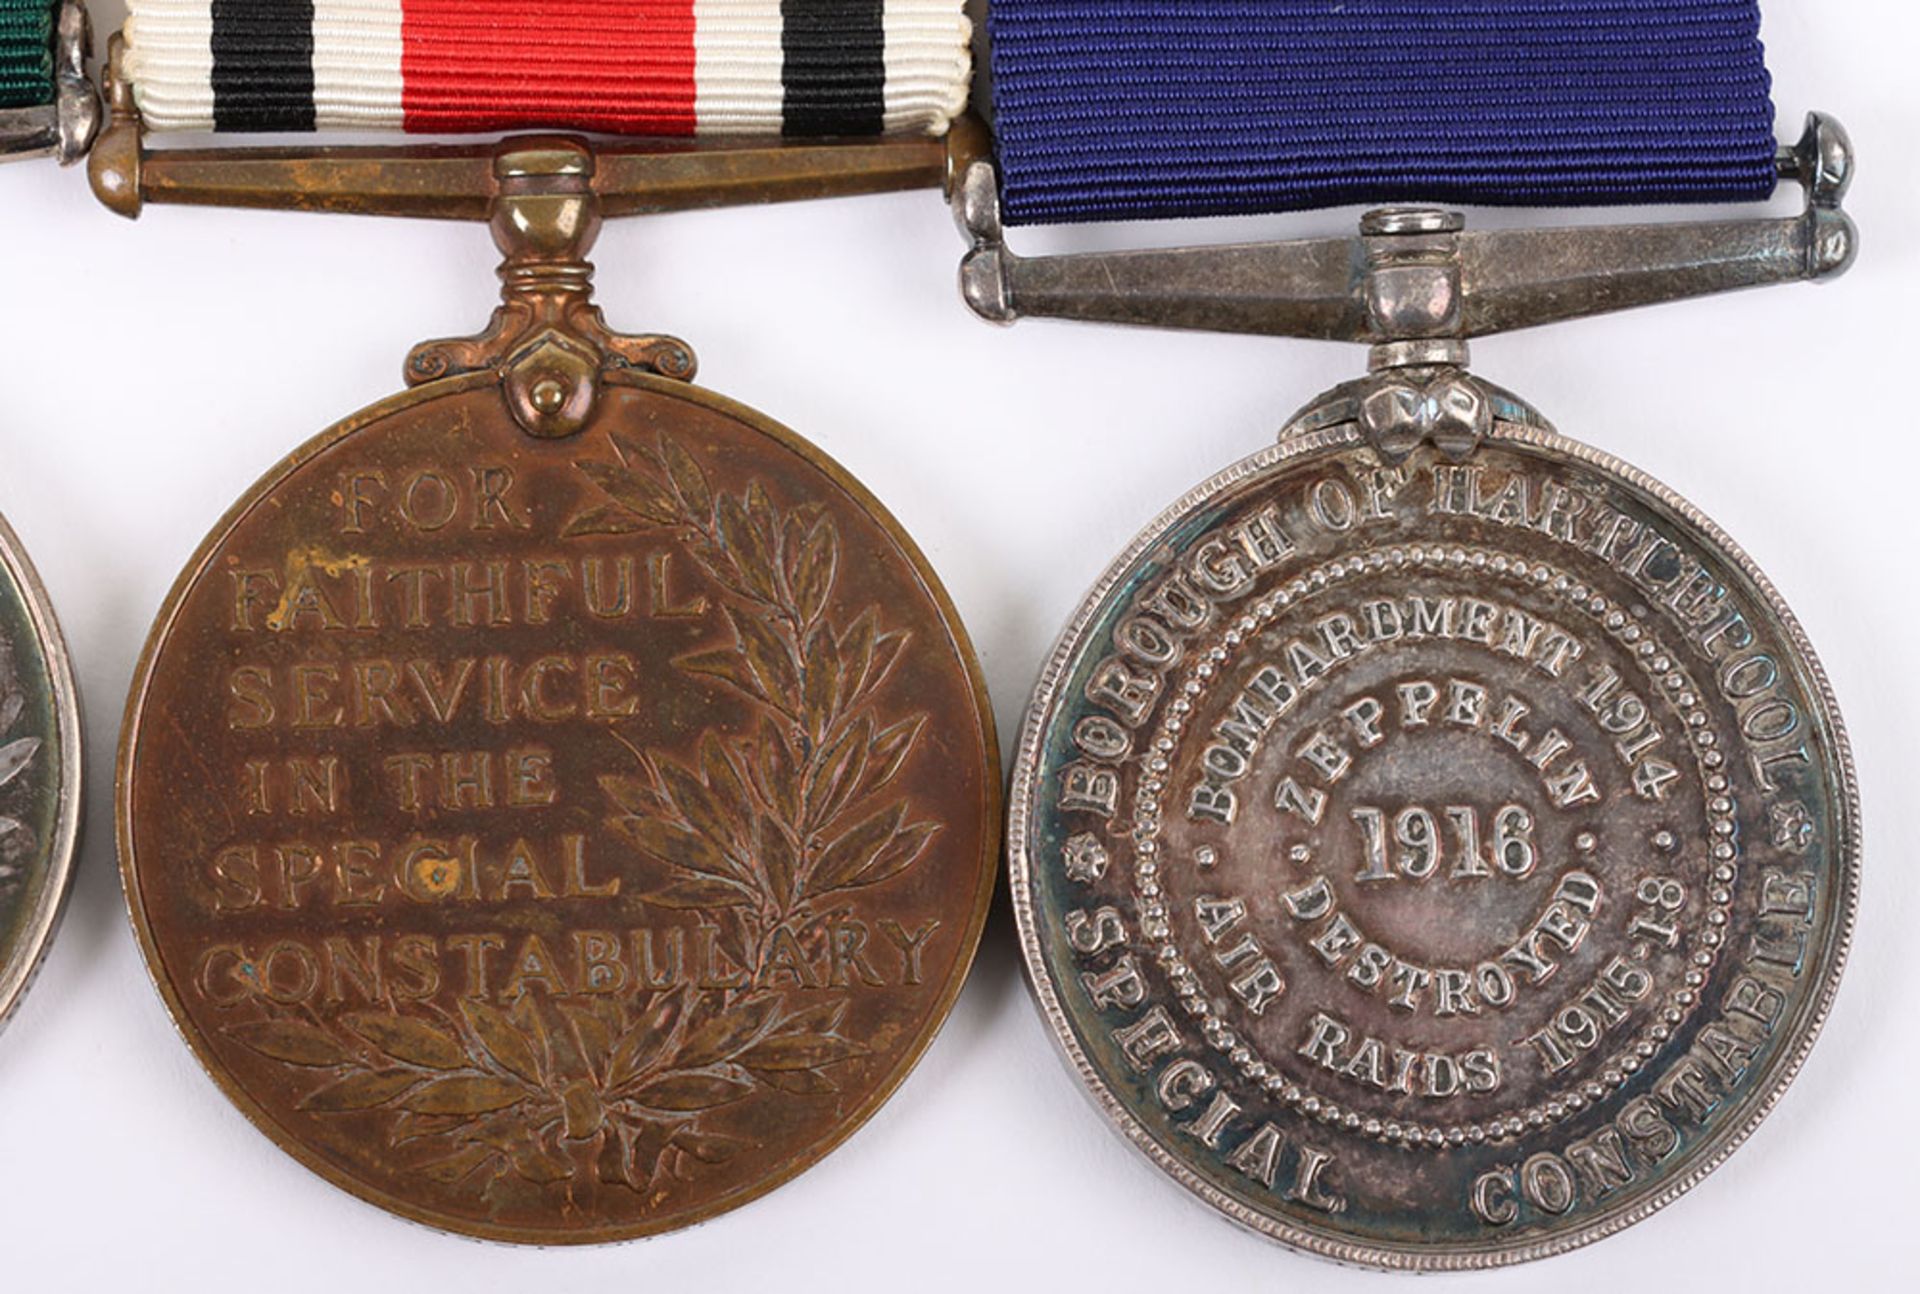 Rare Great War Hartlepool Special Constabulary Double Long Service Medal Group of Three - Image 9 of 10